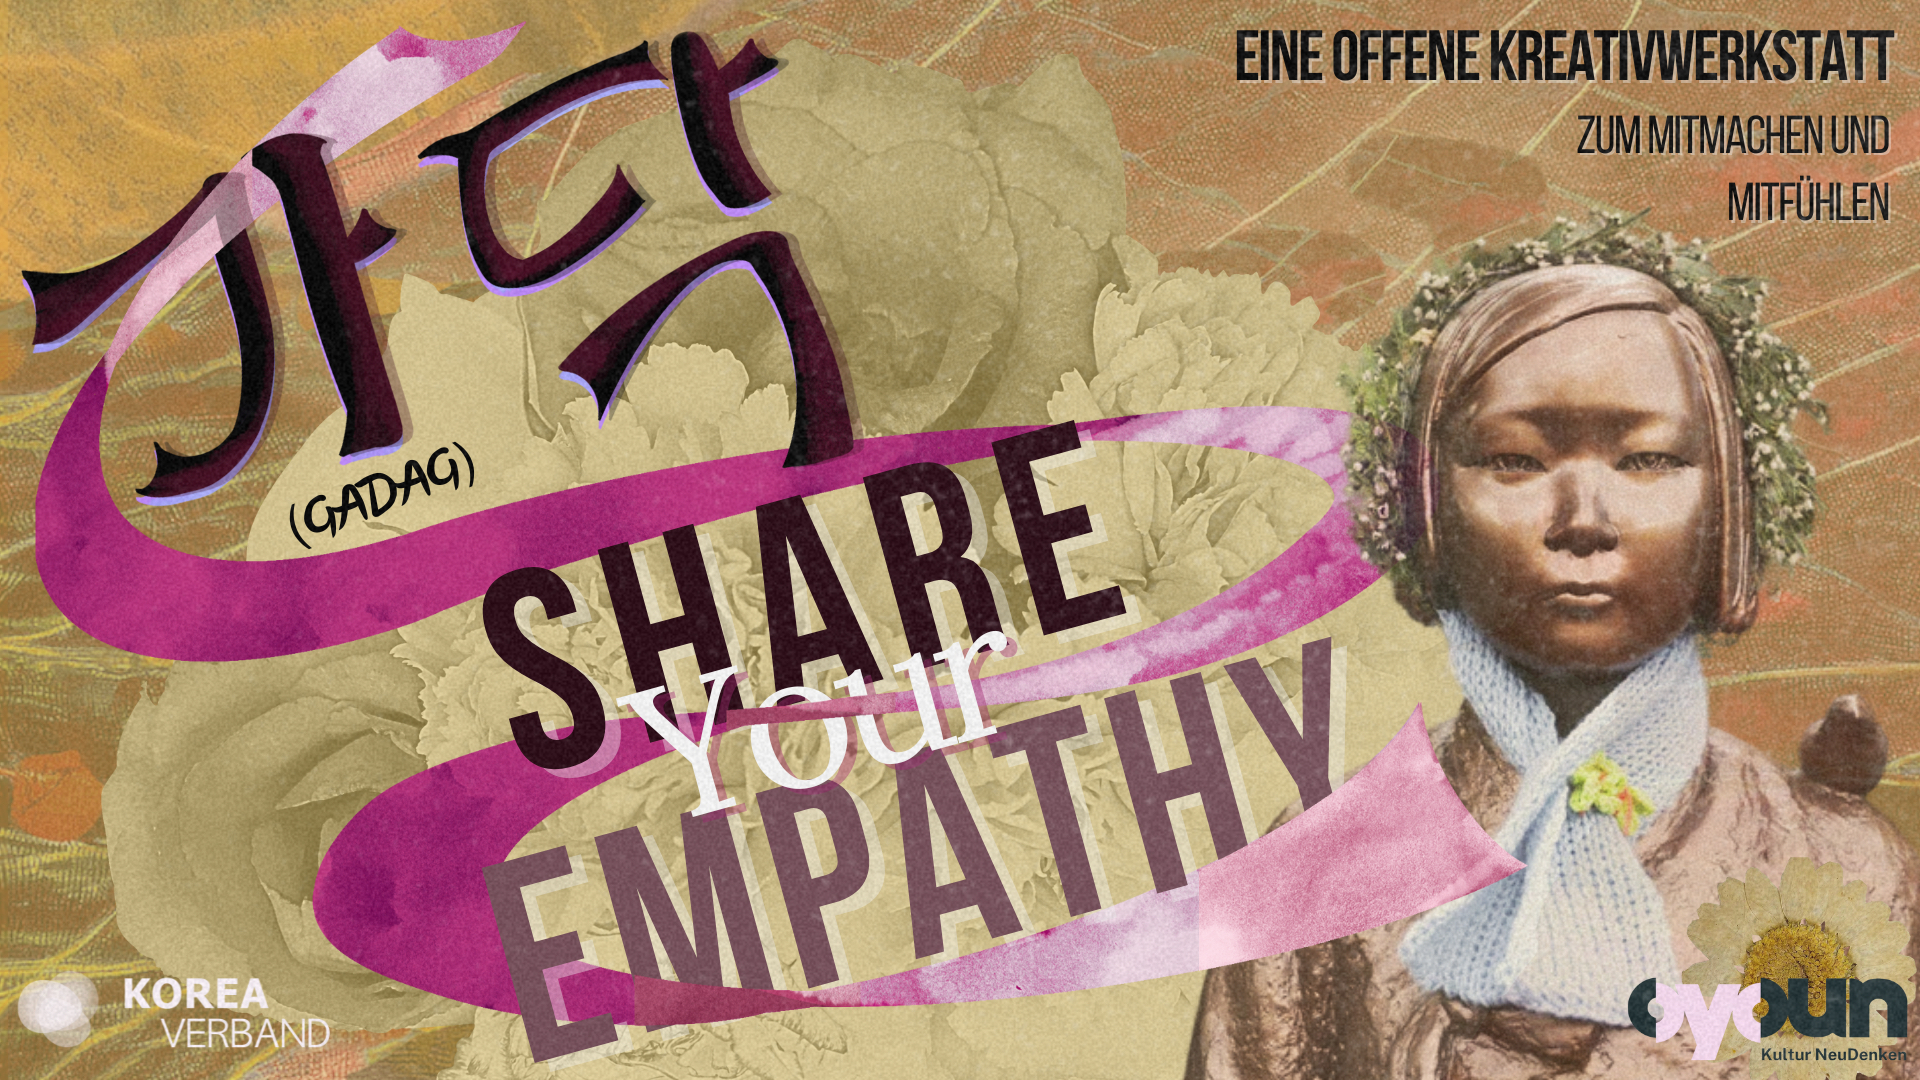 English: Creative workshop poster with a historical figure and text "Share Your Empathy." German: Creative workshop poster with a historical figure and the text "Share your empathy."